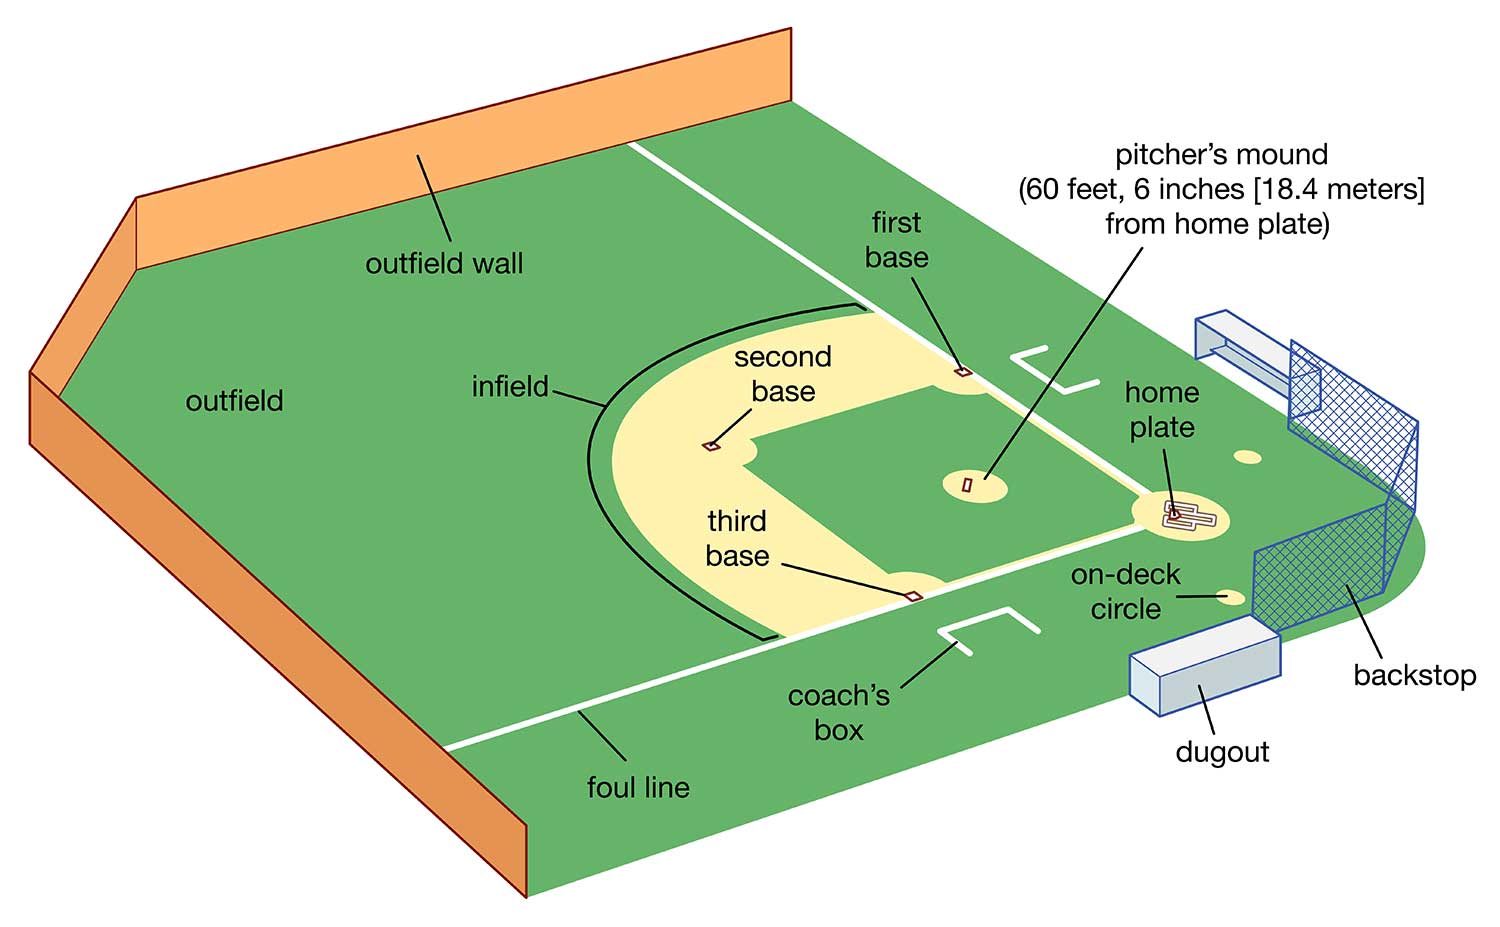 Baseball field with bases, infield, outfield, and pitcher’s mound labeled.